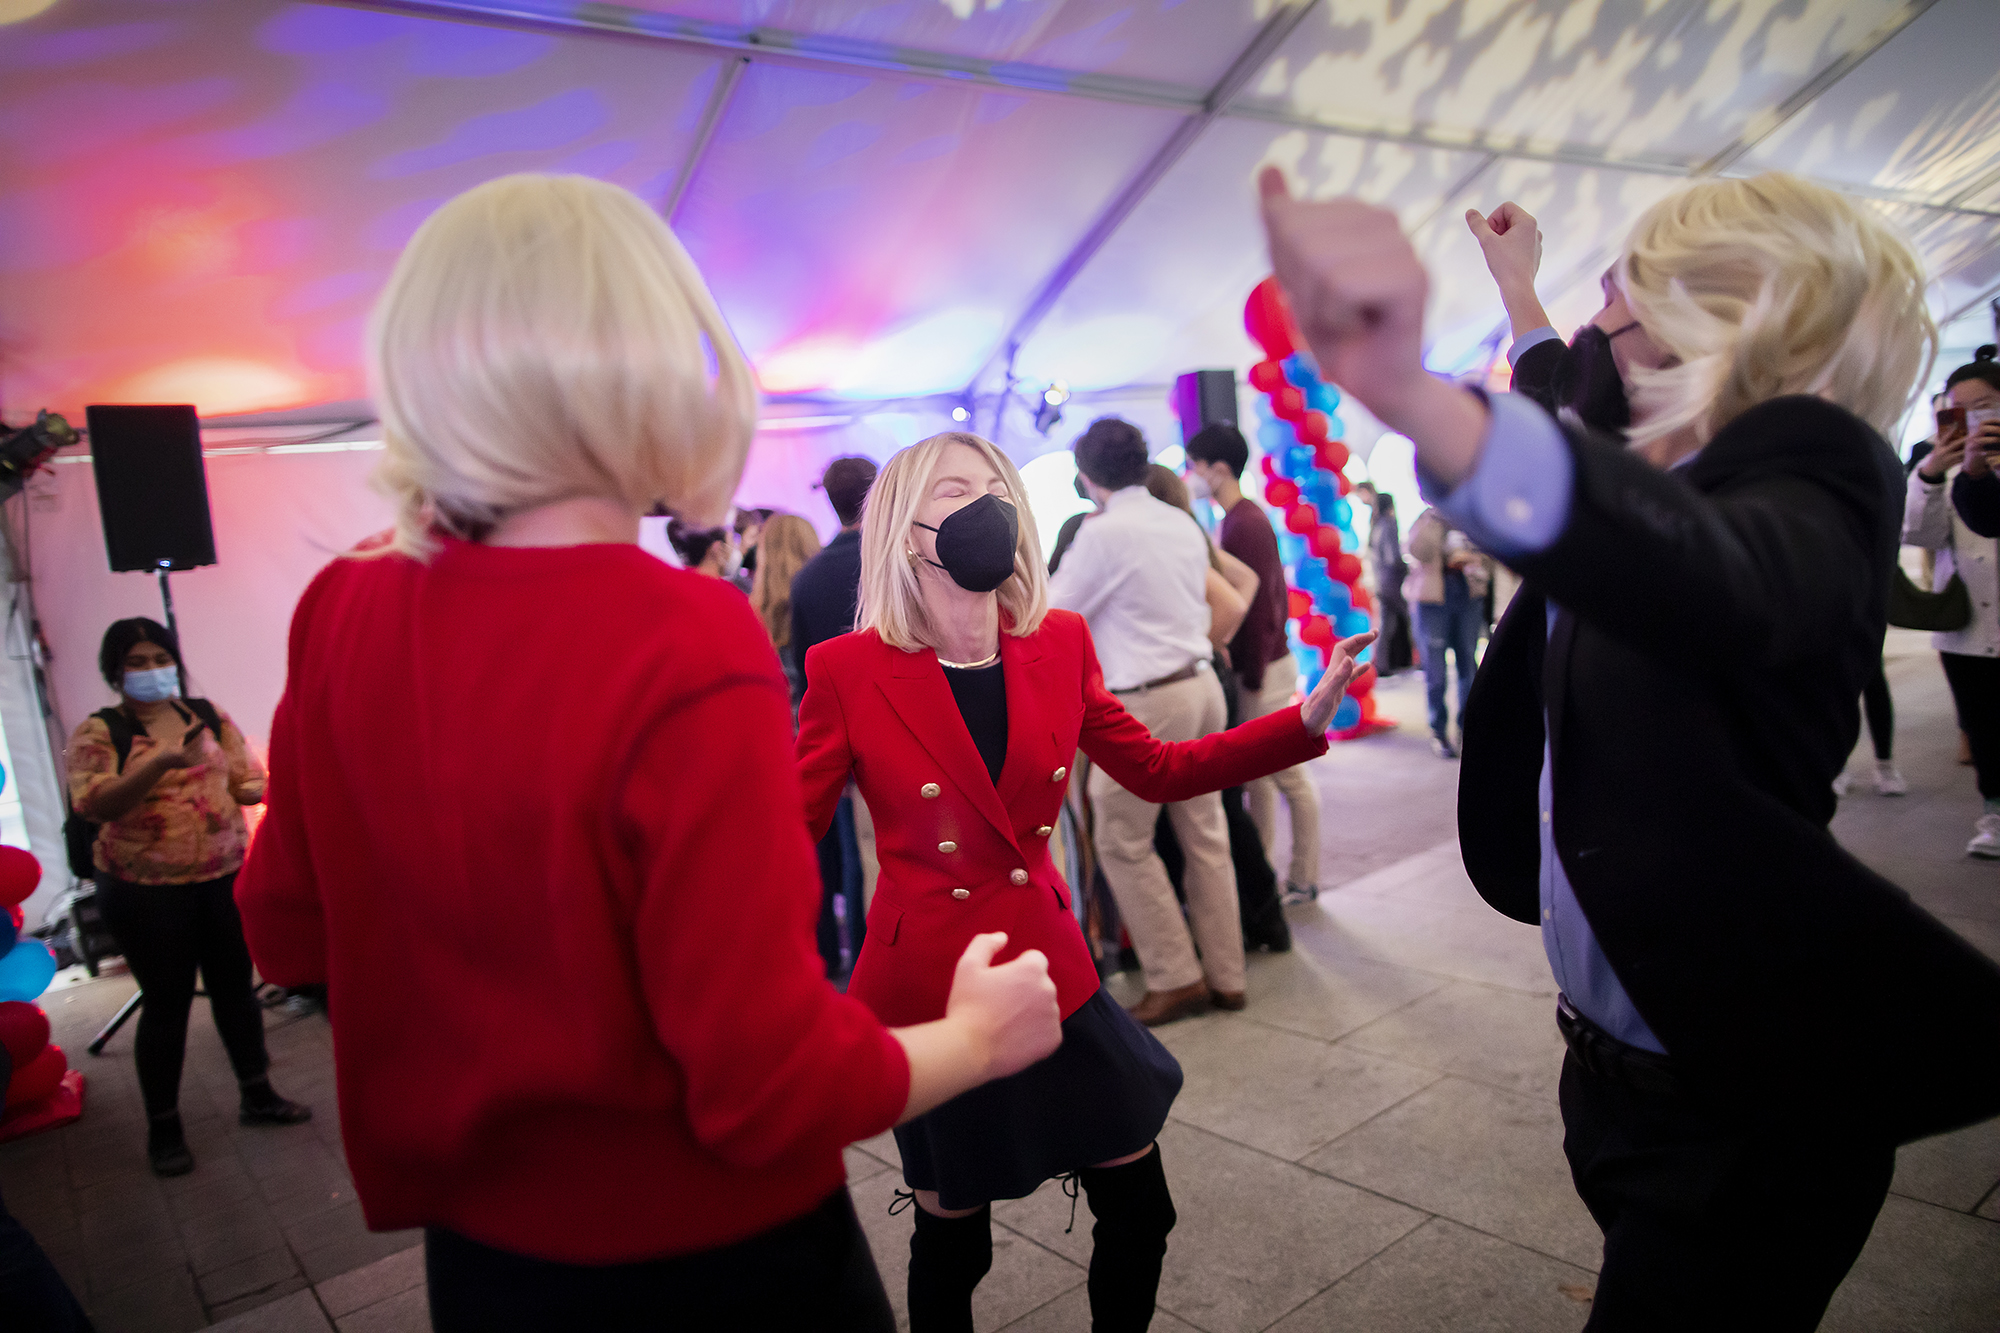 Penn President Amy Gutmann at a party talking with two students wearing blonde wigs with their arms in the air.